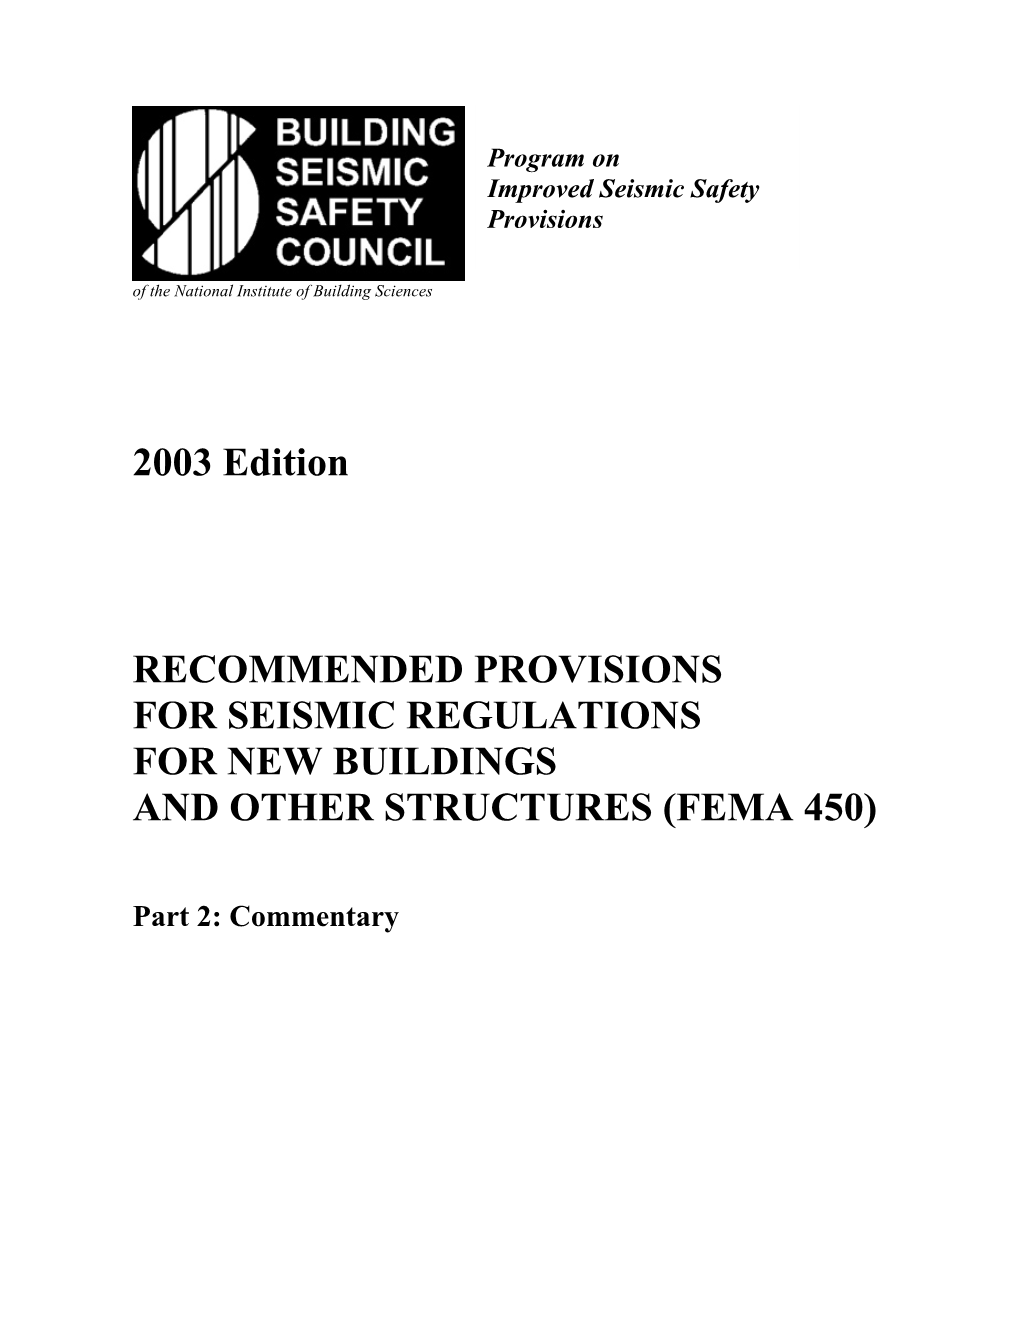 2003 Edition RECOMMENDED PROVISIONS for SEISMIC